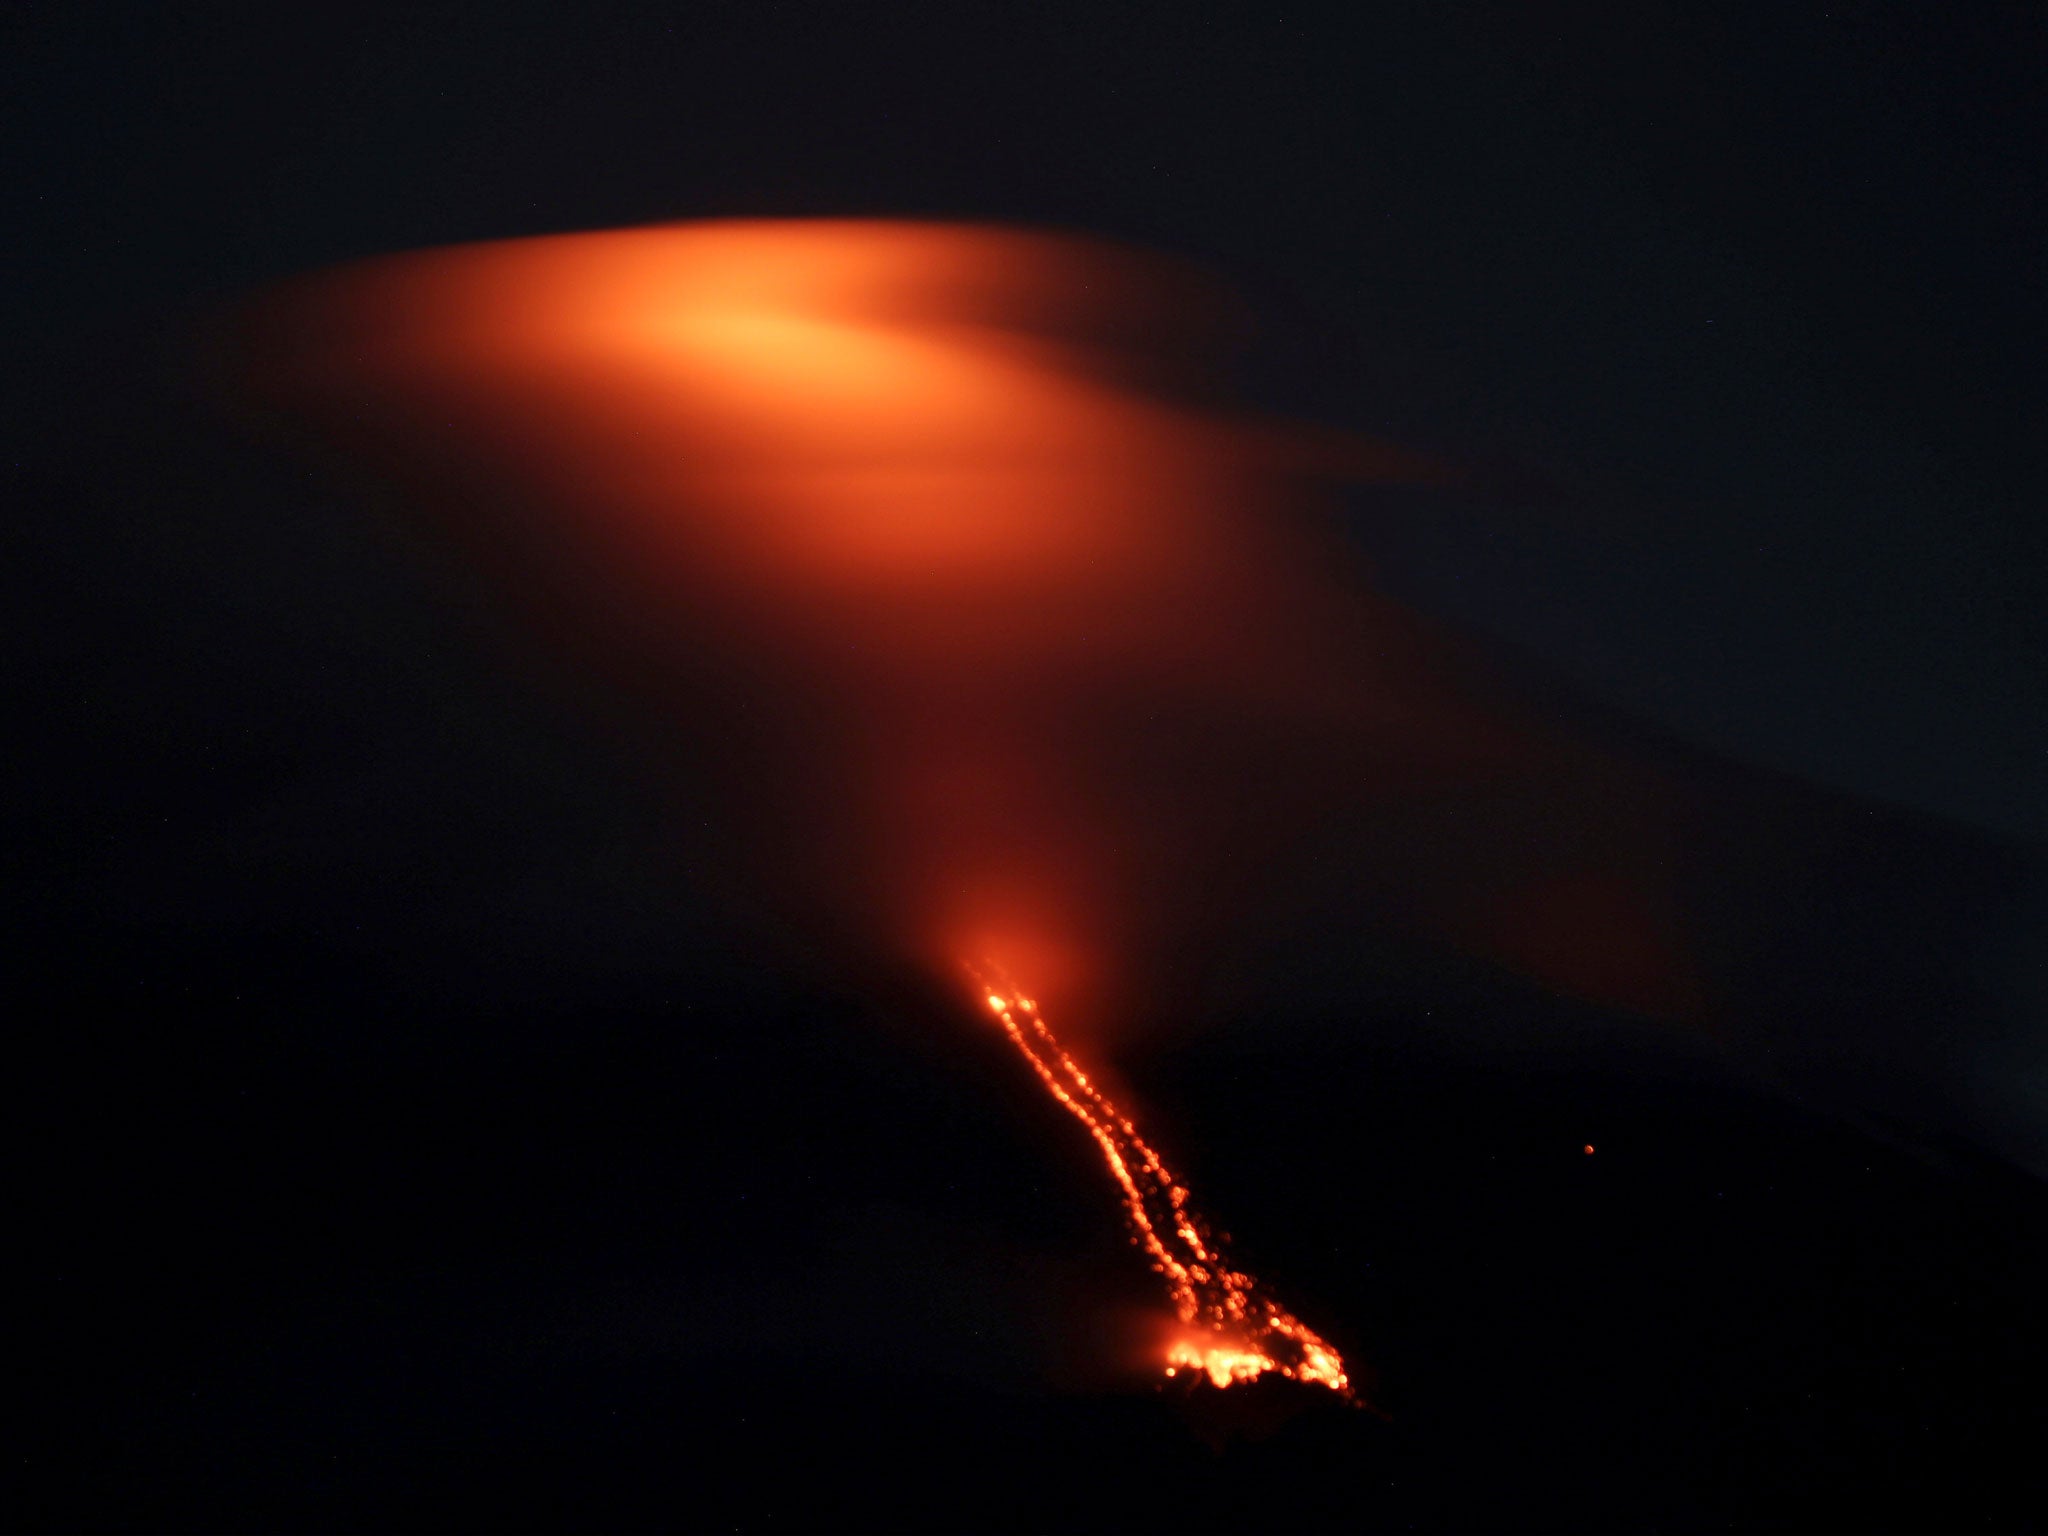 The reddish glow of lava drifting from Mayon volcano